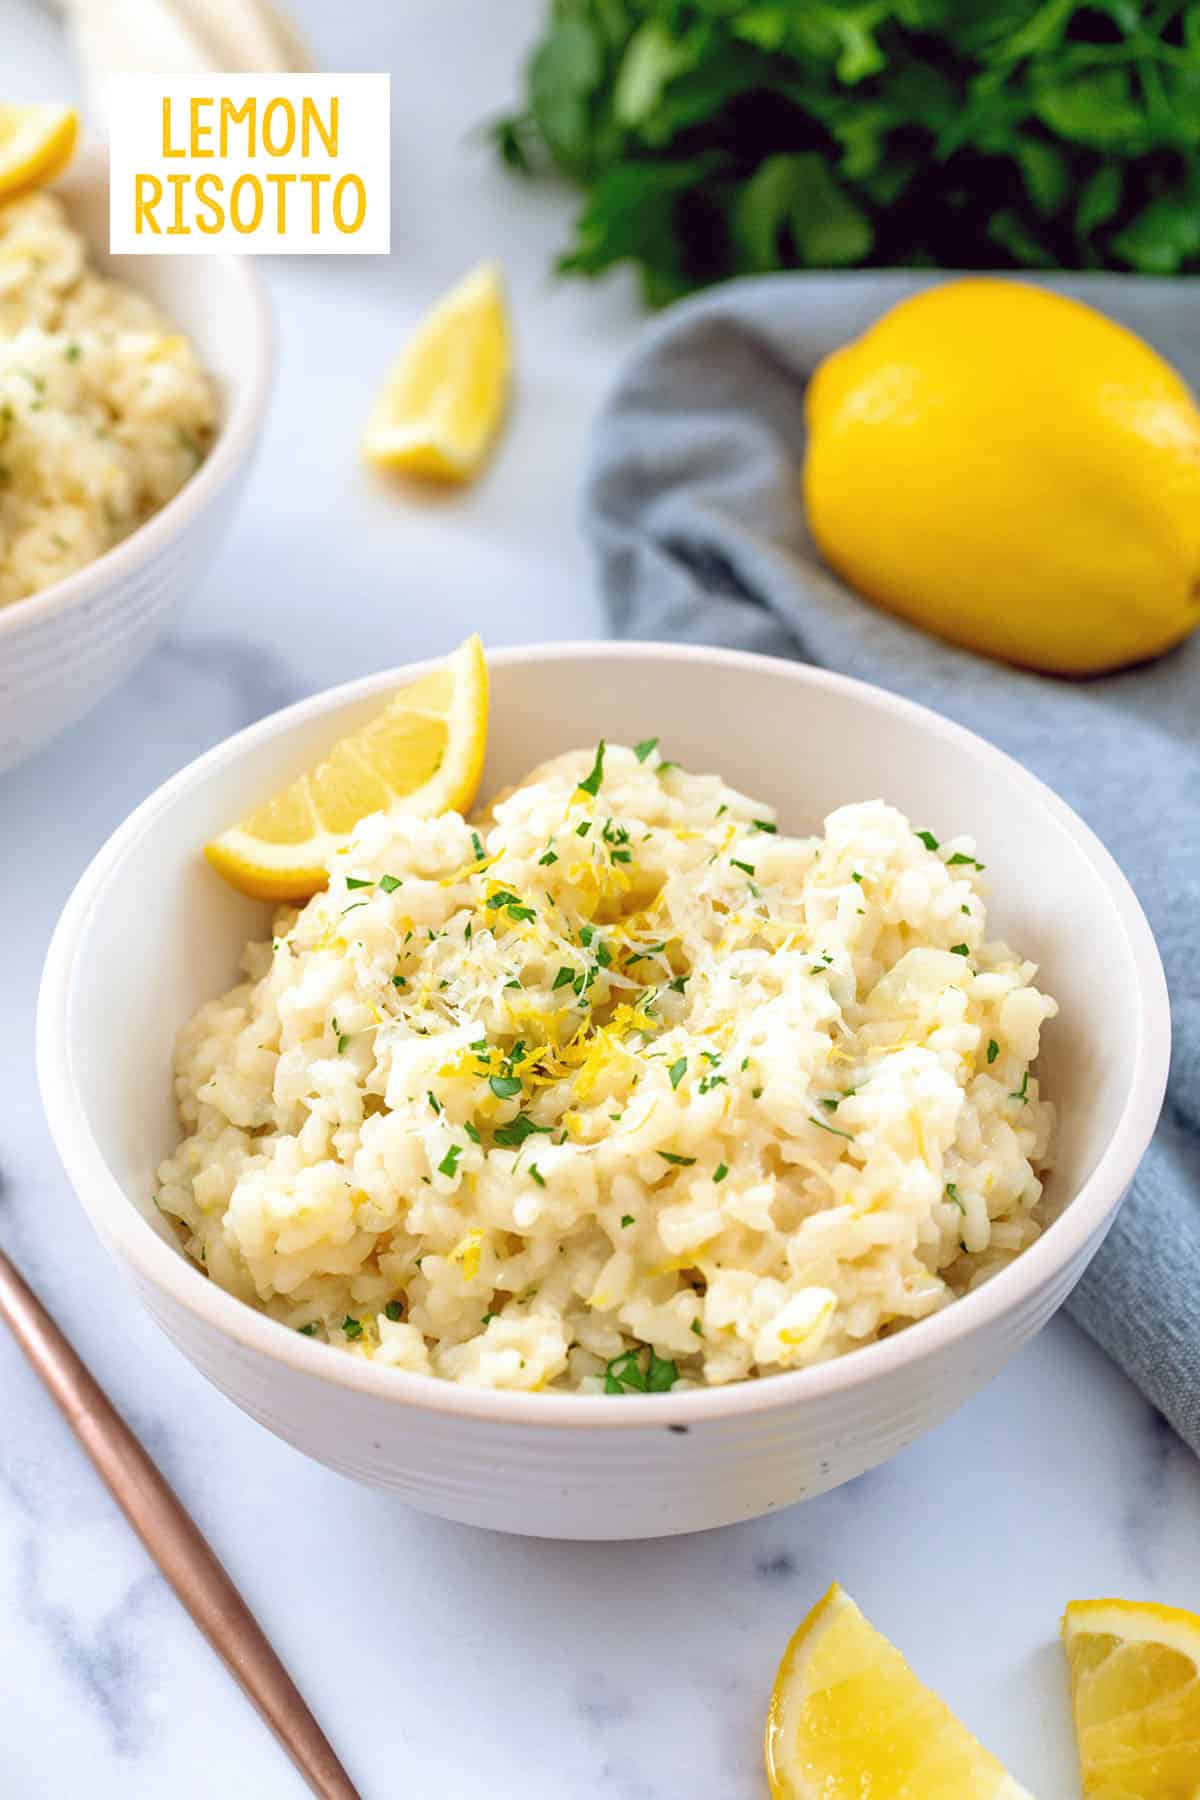 Bowl of lemon risotto with lemon wedges and bunch of parsley and recipe title at top.